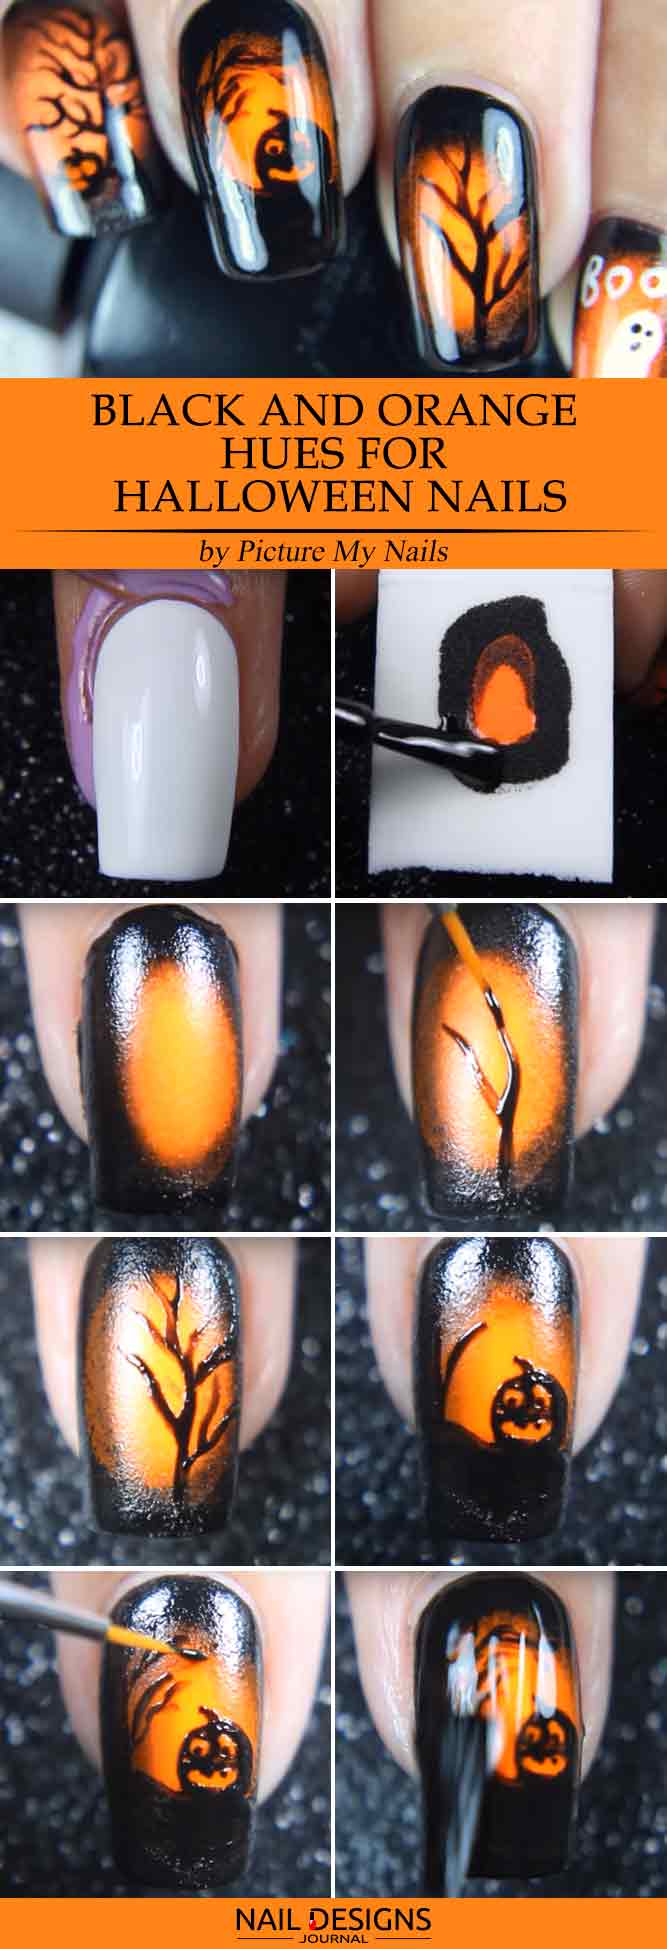 Classic Black and Orange Hues for Halloween Nail Ideas